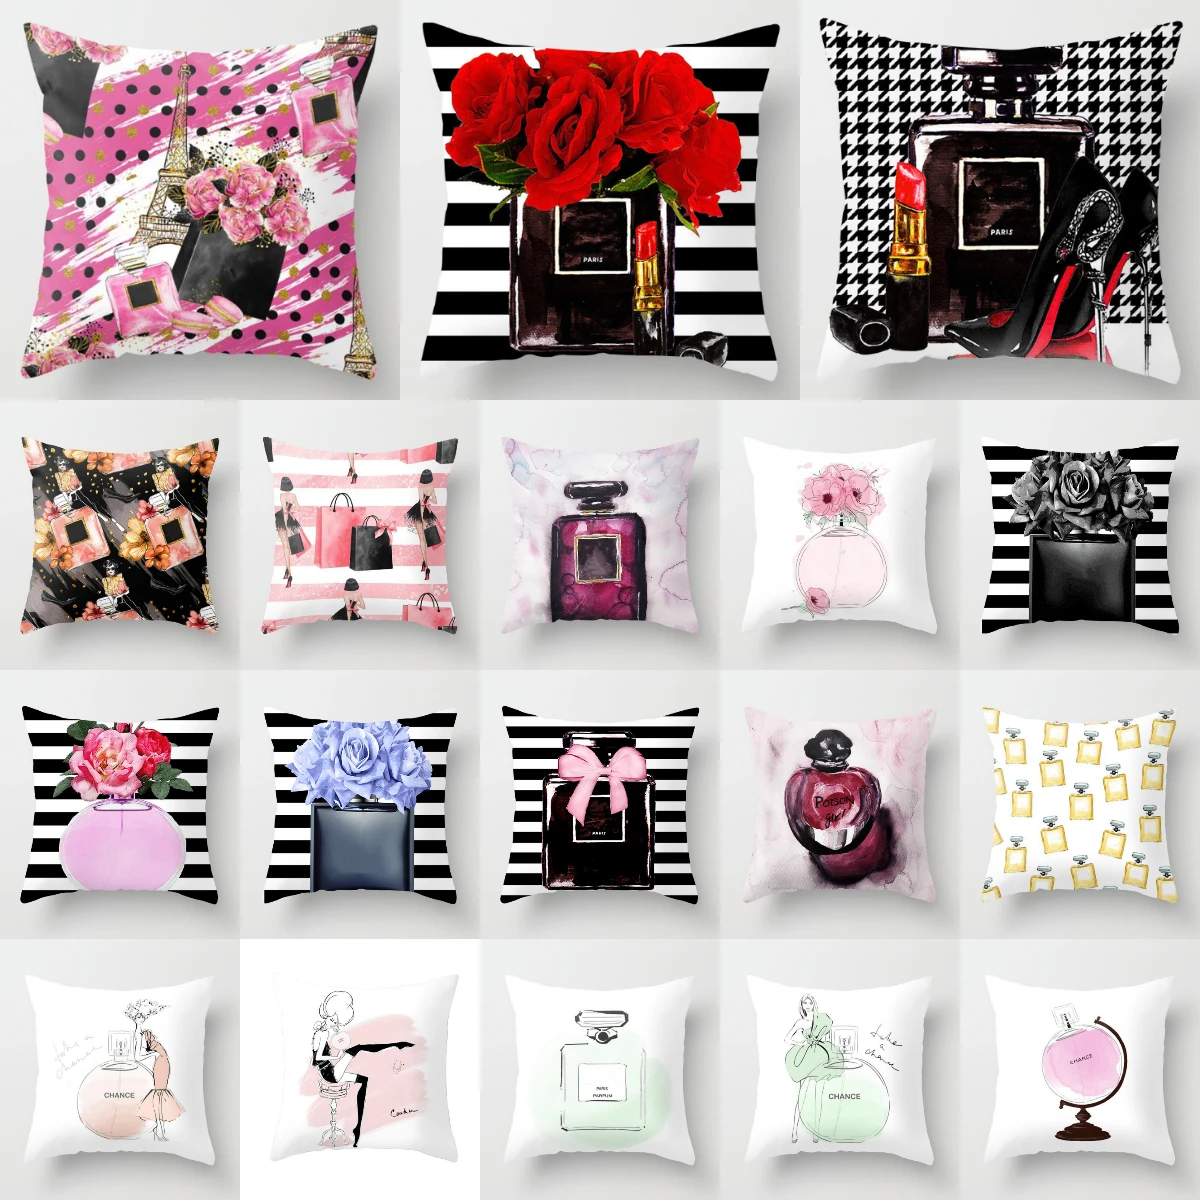 NEW Perfume Bottles Series Floral Pillows Cover Hand Painted Flowers  Cushion Cover Modern Fashion Livingroom Decorative Pillows